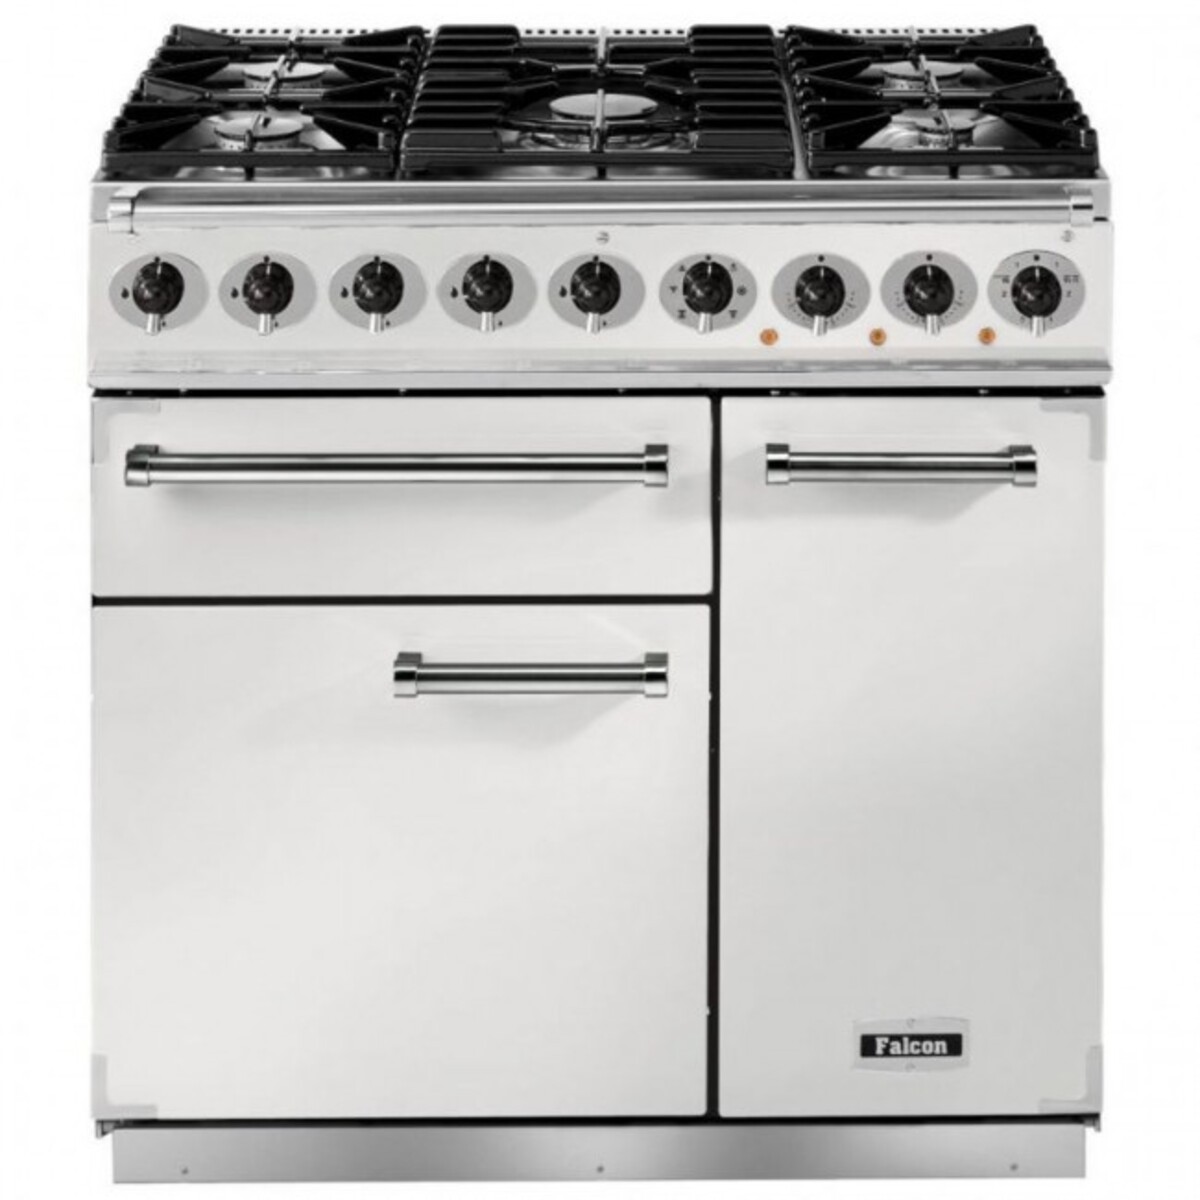 FALCON F900DXDFWHNM 82380 - 90cm Deluxe Dual Fuel Range Cooker, White